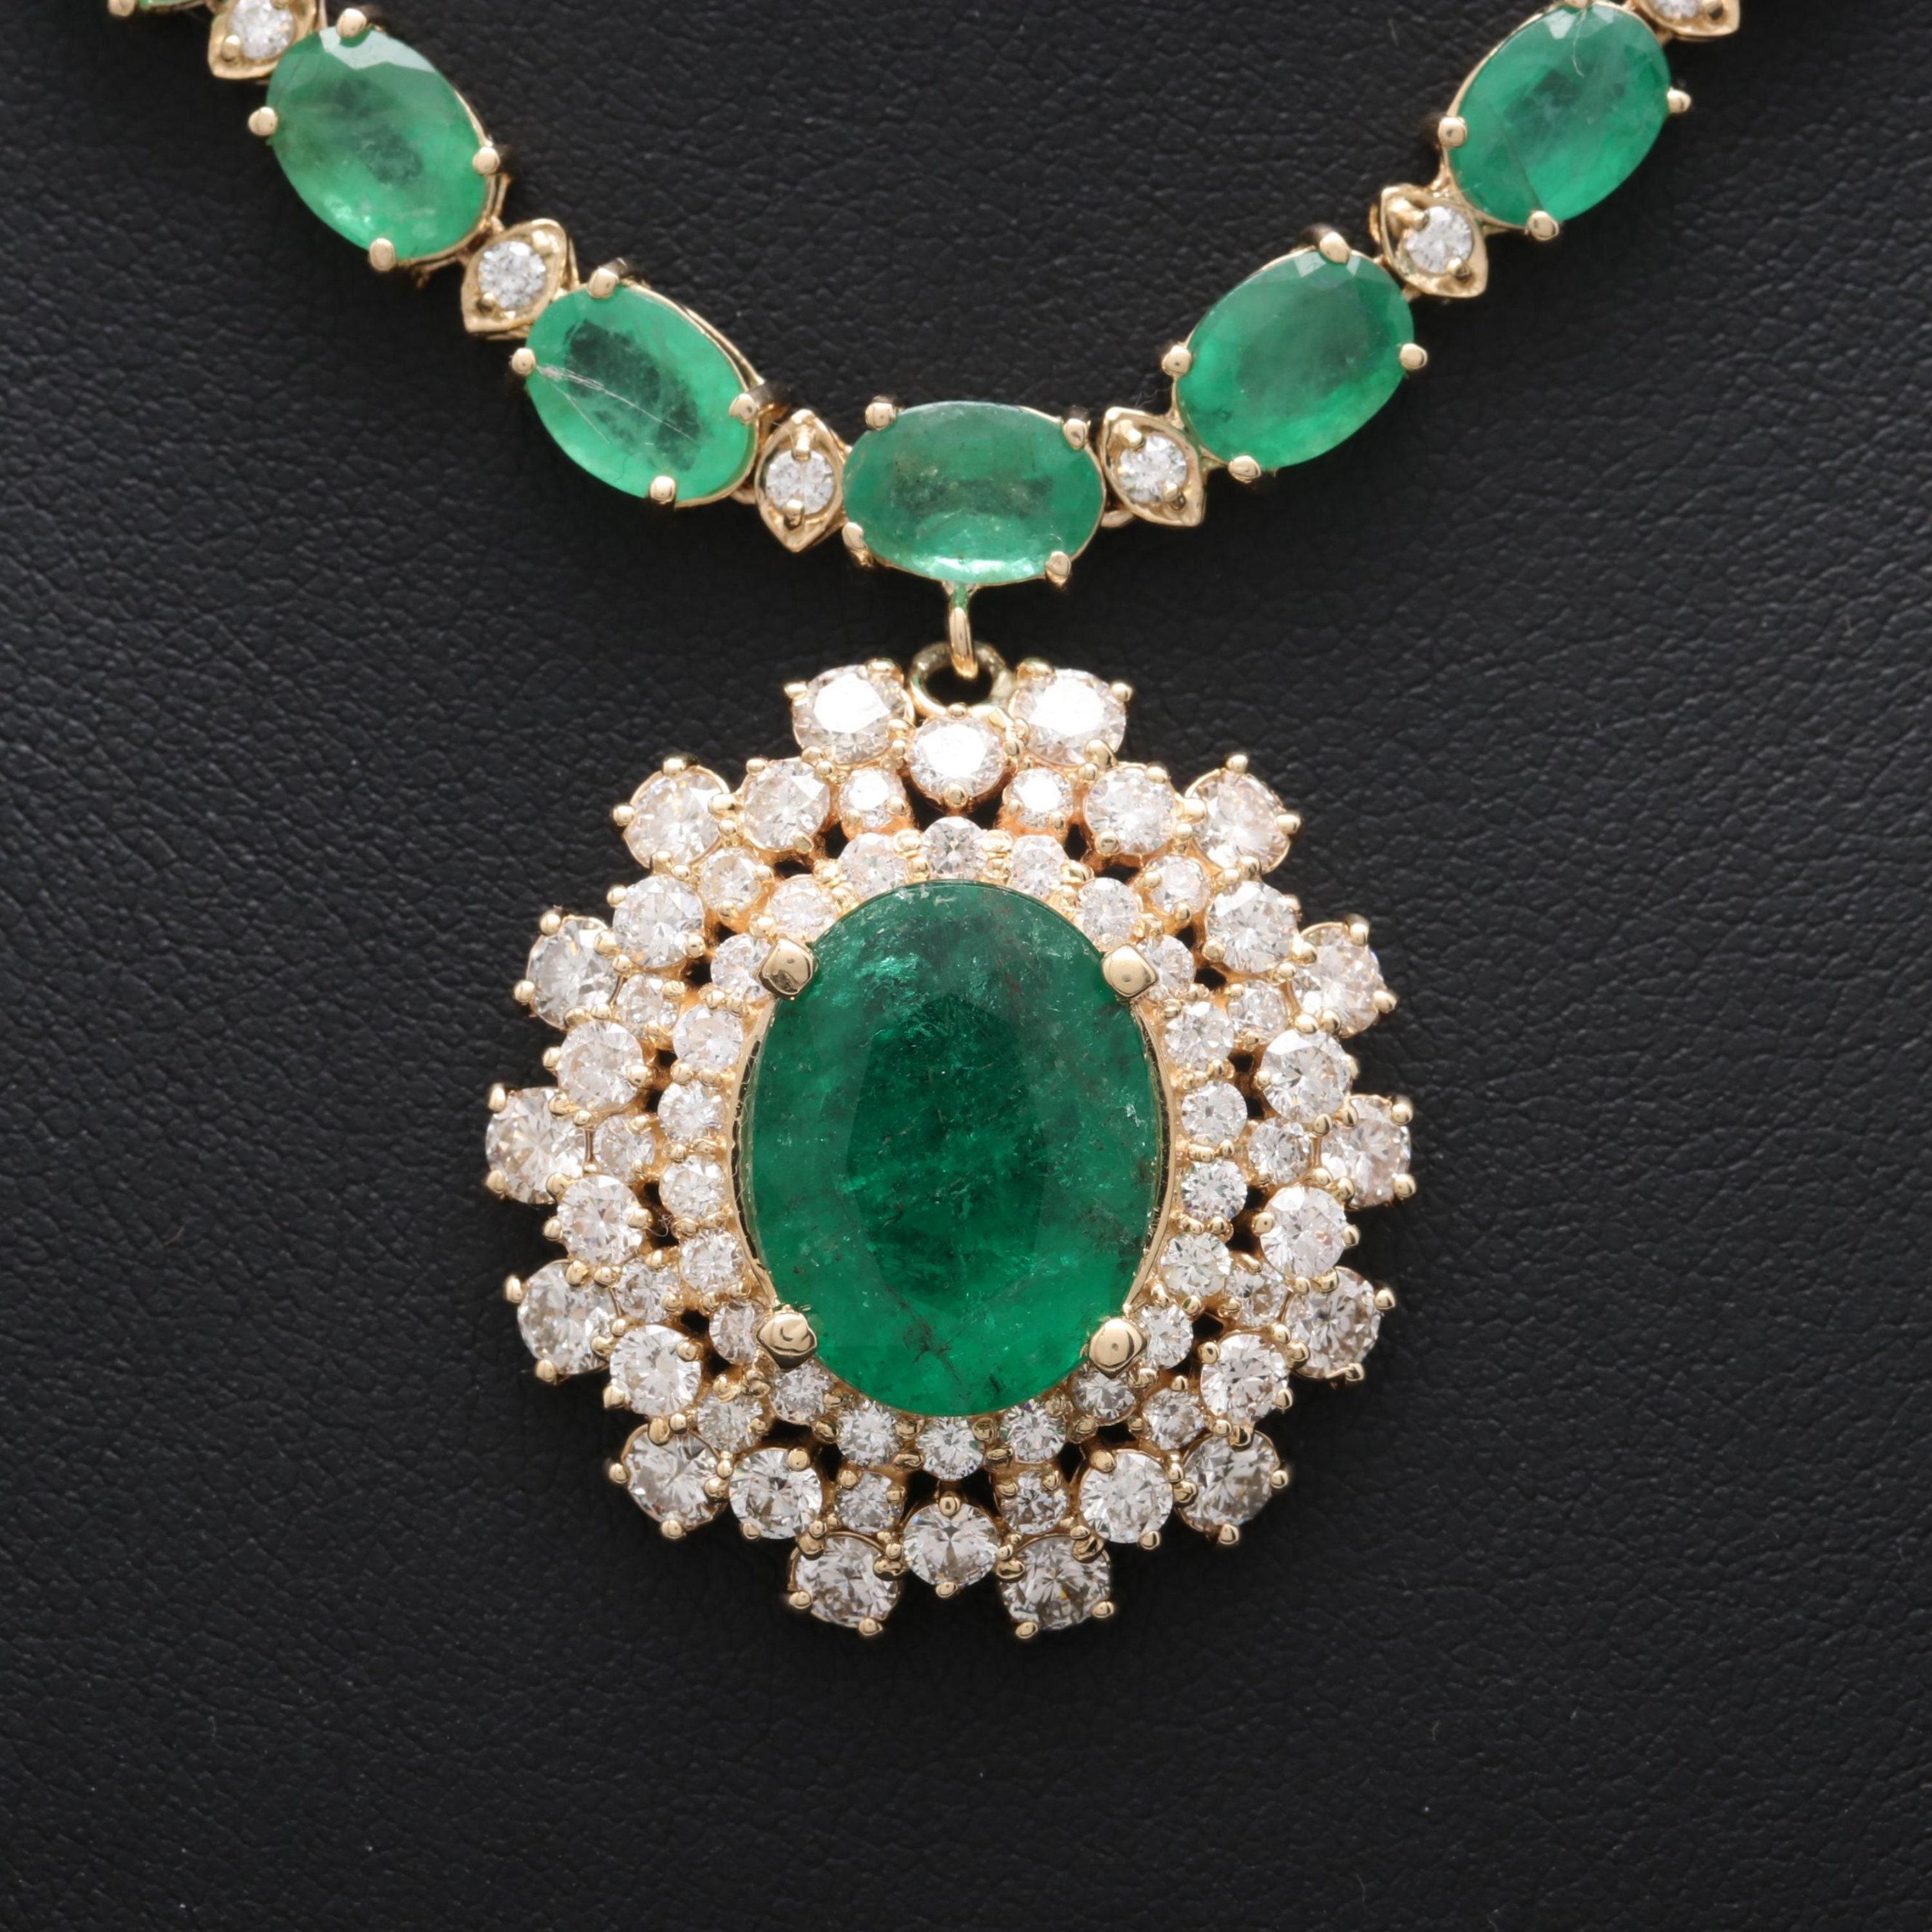 Halo Oval Cut Emerald Diamonds Pendant Necklace, Unique Natural Emerald Diamond Necklace,  Vintage Diamond Necklace For Her
 
 Item Description
 → Handmade, Made to order
 → Material: SOLID 18K/18K GOLD
 
 Stone Details
 
 → Primary Stone(s) Type: